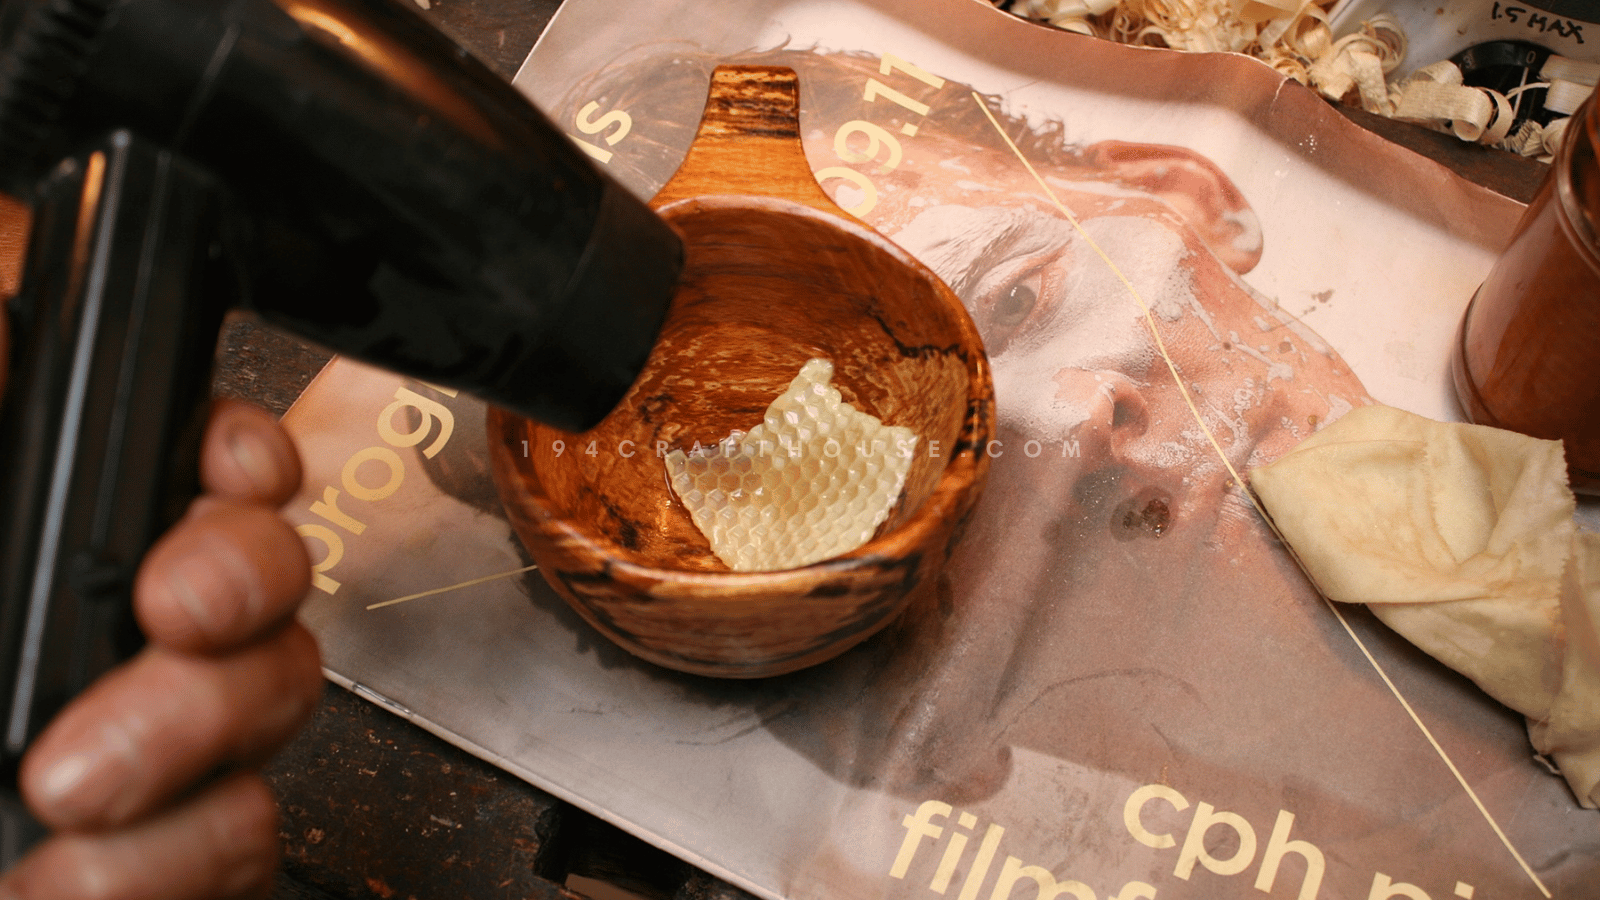 How to make a Kuksa cup step by step - Step 8: Season the Kuksa